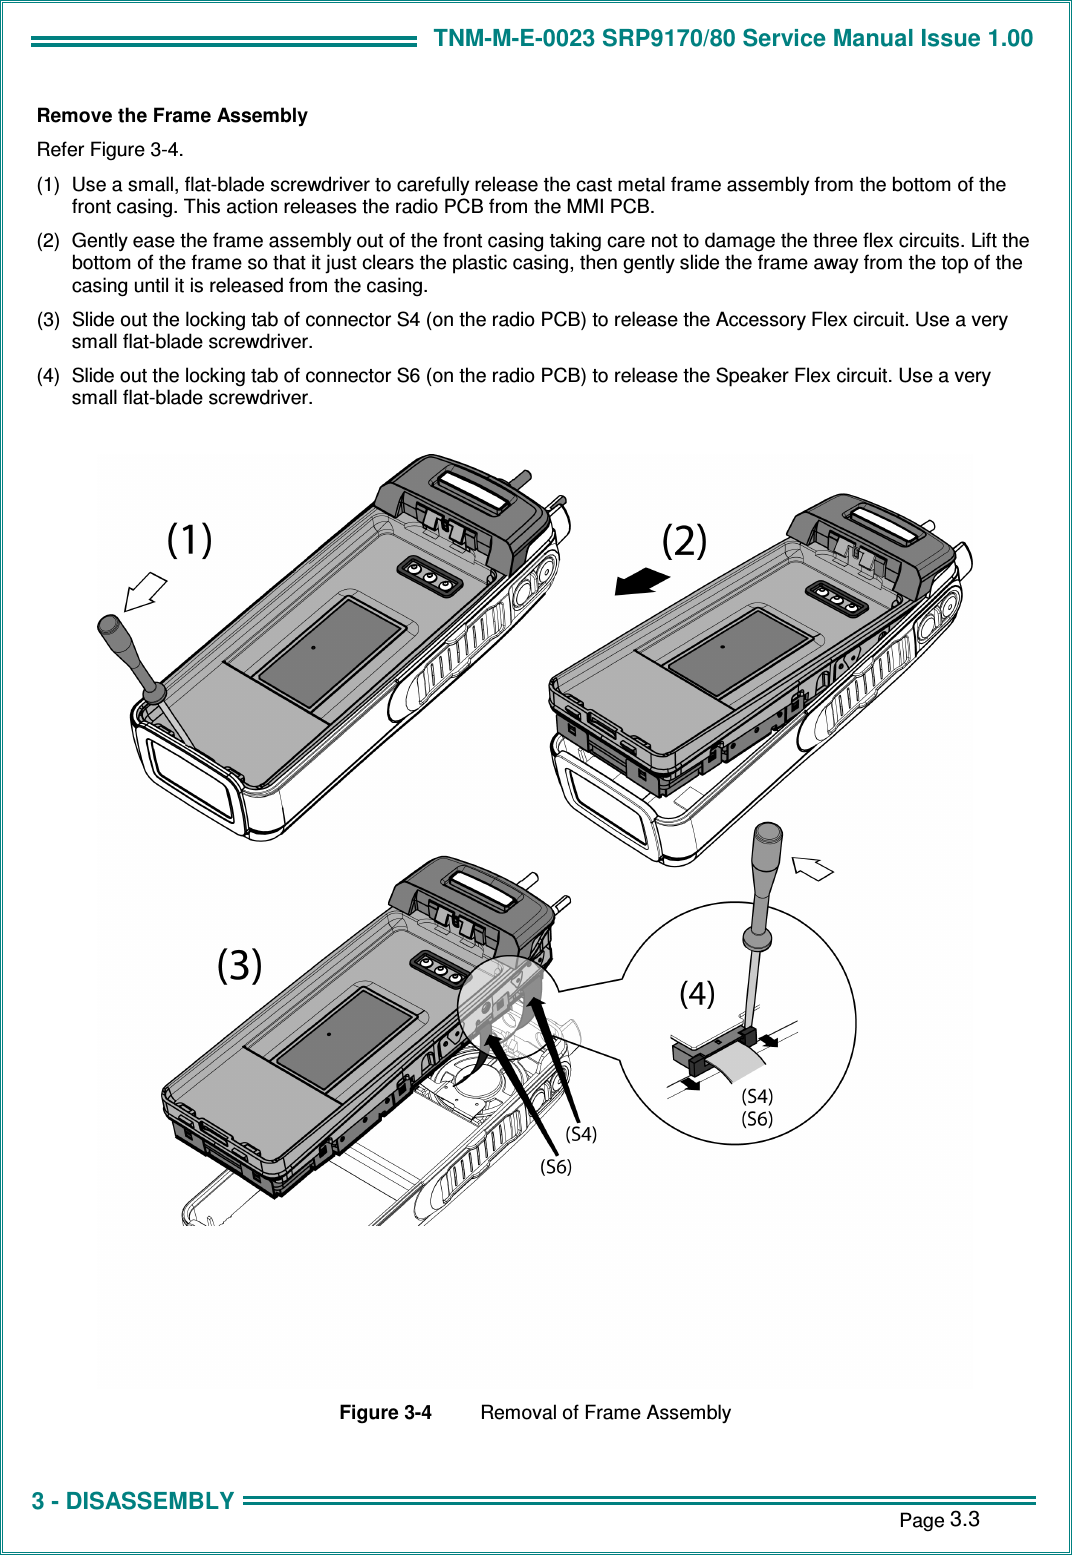 TNM-M-E-0023 SRP9170/80 Service Manual Issue 1.00 1 - INTRODUCTION    Page 3.3 3 - DISASSEMBLY Remove the Frame Assembly Refer Figure 3-4. (1)  Use a small, flat-blade screwdriver to carefully release the cast metal frame assembly from the bottom of the front casing. This action releases the radio PCB from the MMI PCB. (2)  Gently ease the frame assembly out of the front casing taking care not to damage the three flex circuits. Lift the bottom of the frame so that it just clears the plastic casing, then gently slide the frame away from the top of the casing until it is released from the casing. (3)  Slide out the locking tab of connector S4 (on the radio PCB) to release the Accessory Flex circuit. Use a very small flat-blade screwdriver. (4)  Slide out the locking tab of connector S6 (on the radio PCB) to release the Speaker Flex circuit. Use a very small flat-blade screwdriver.   Figure 3-4  Removal of Frame Assembly 